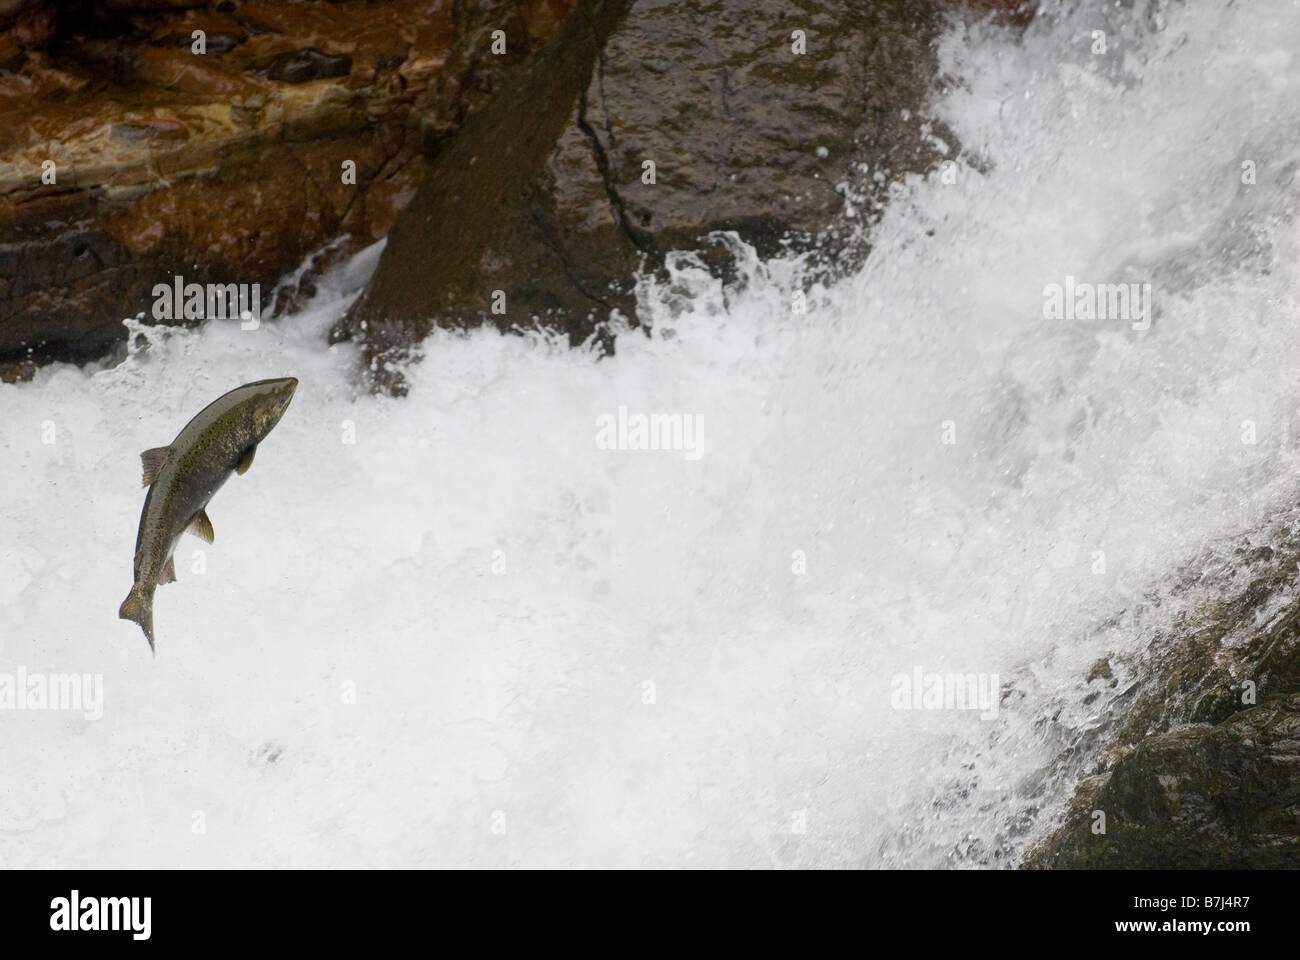 Stamp falls, Port Alberni. The end show the salmon on the salmon cam!